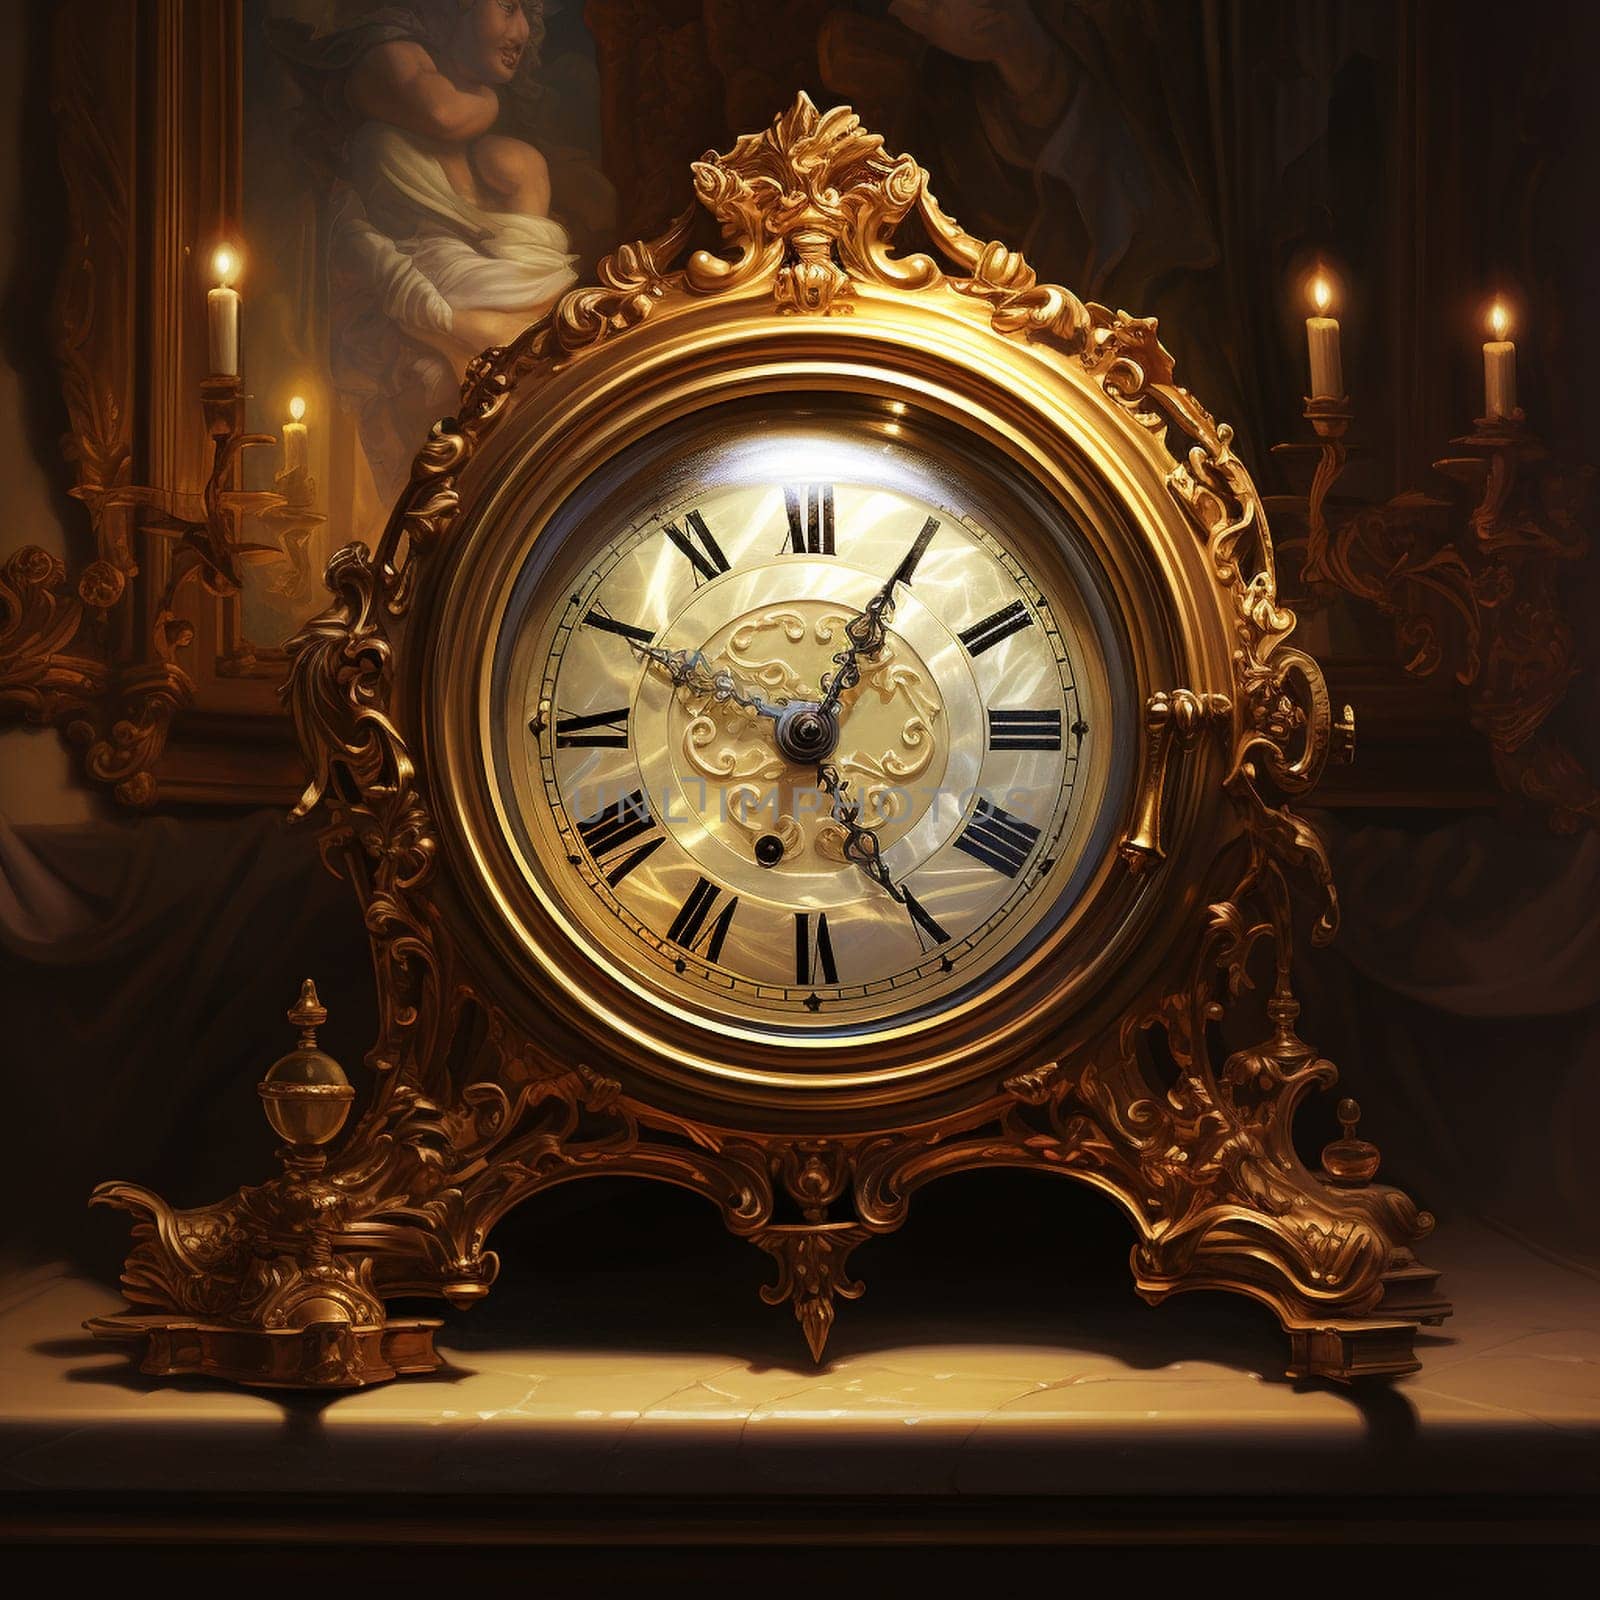 Realistic Oil Painting: Reflection of Historical Moments in Vintage Clocks by Sahin